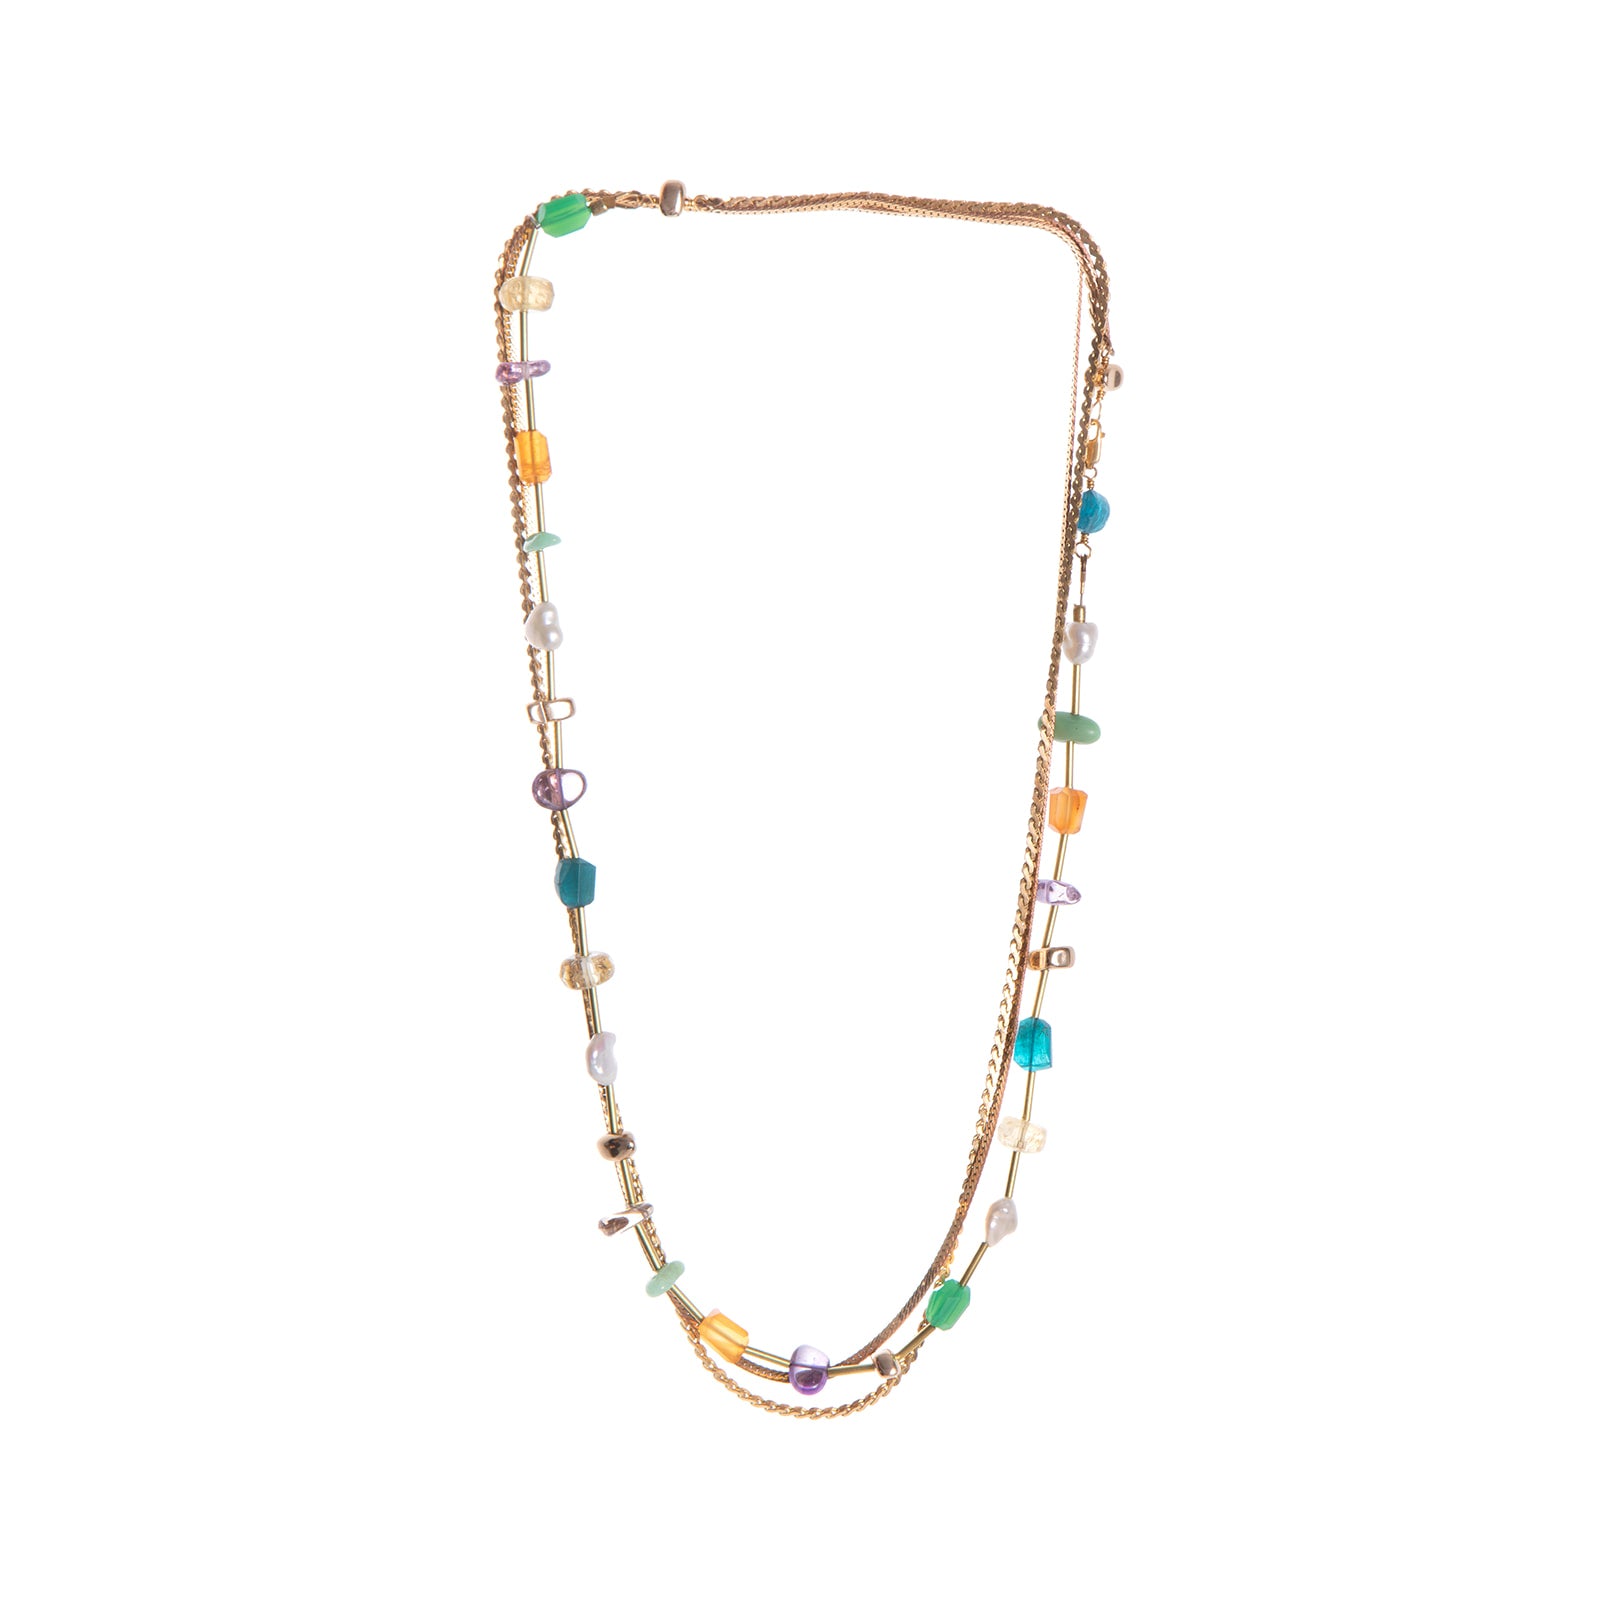 Hailey Gerrits - Solana 2-in-1 Necklace